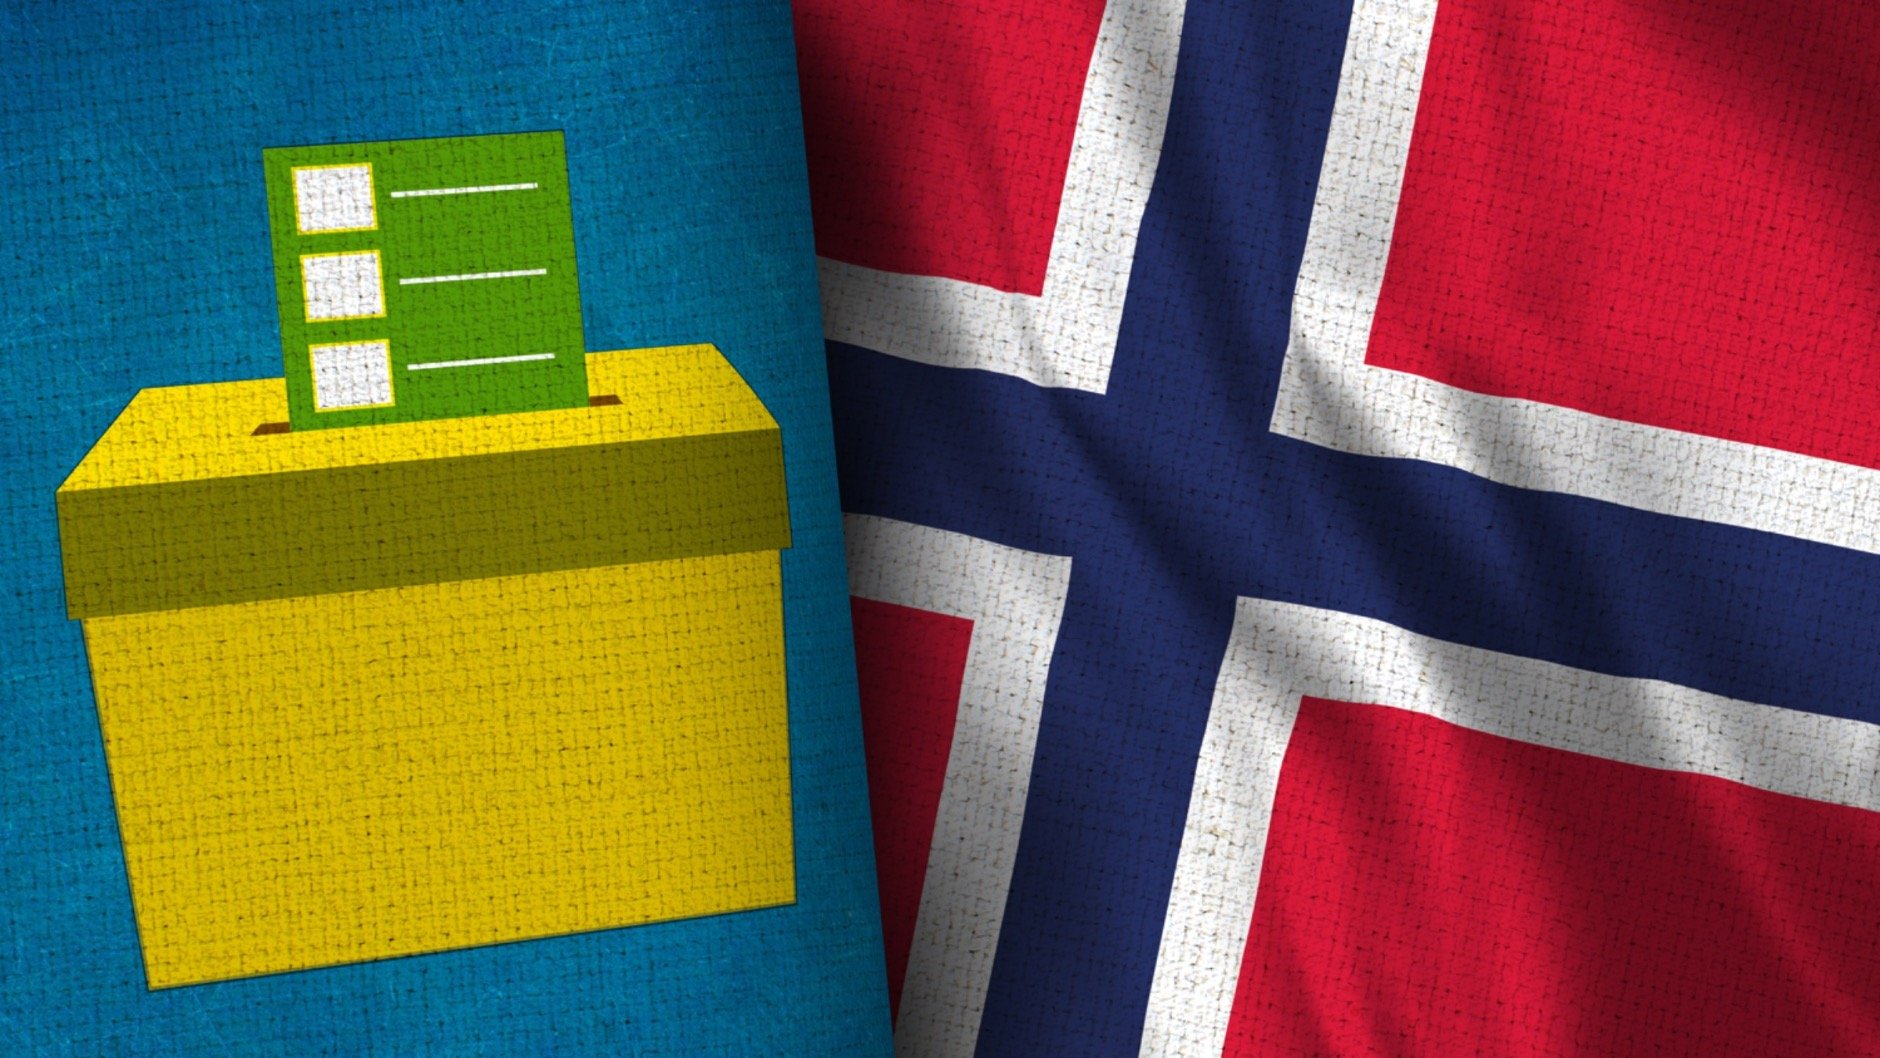 Norway voting election concept image